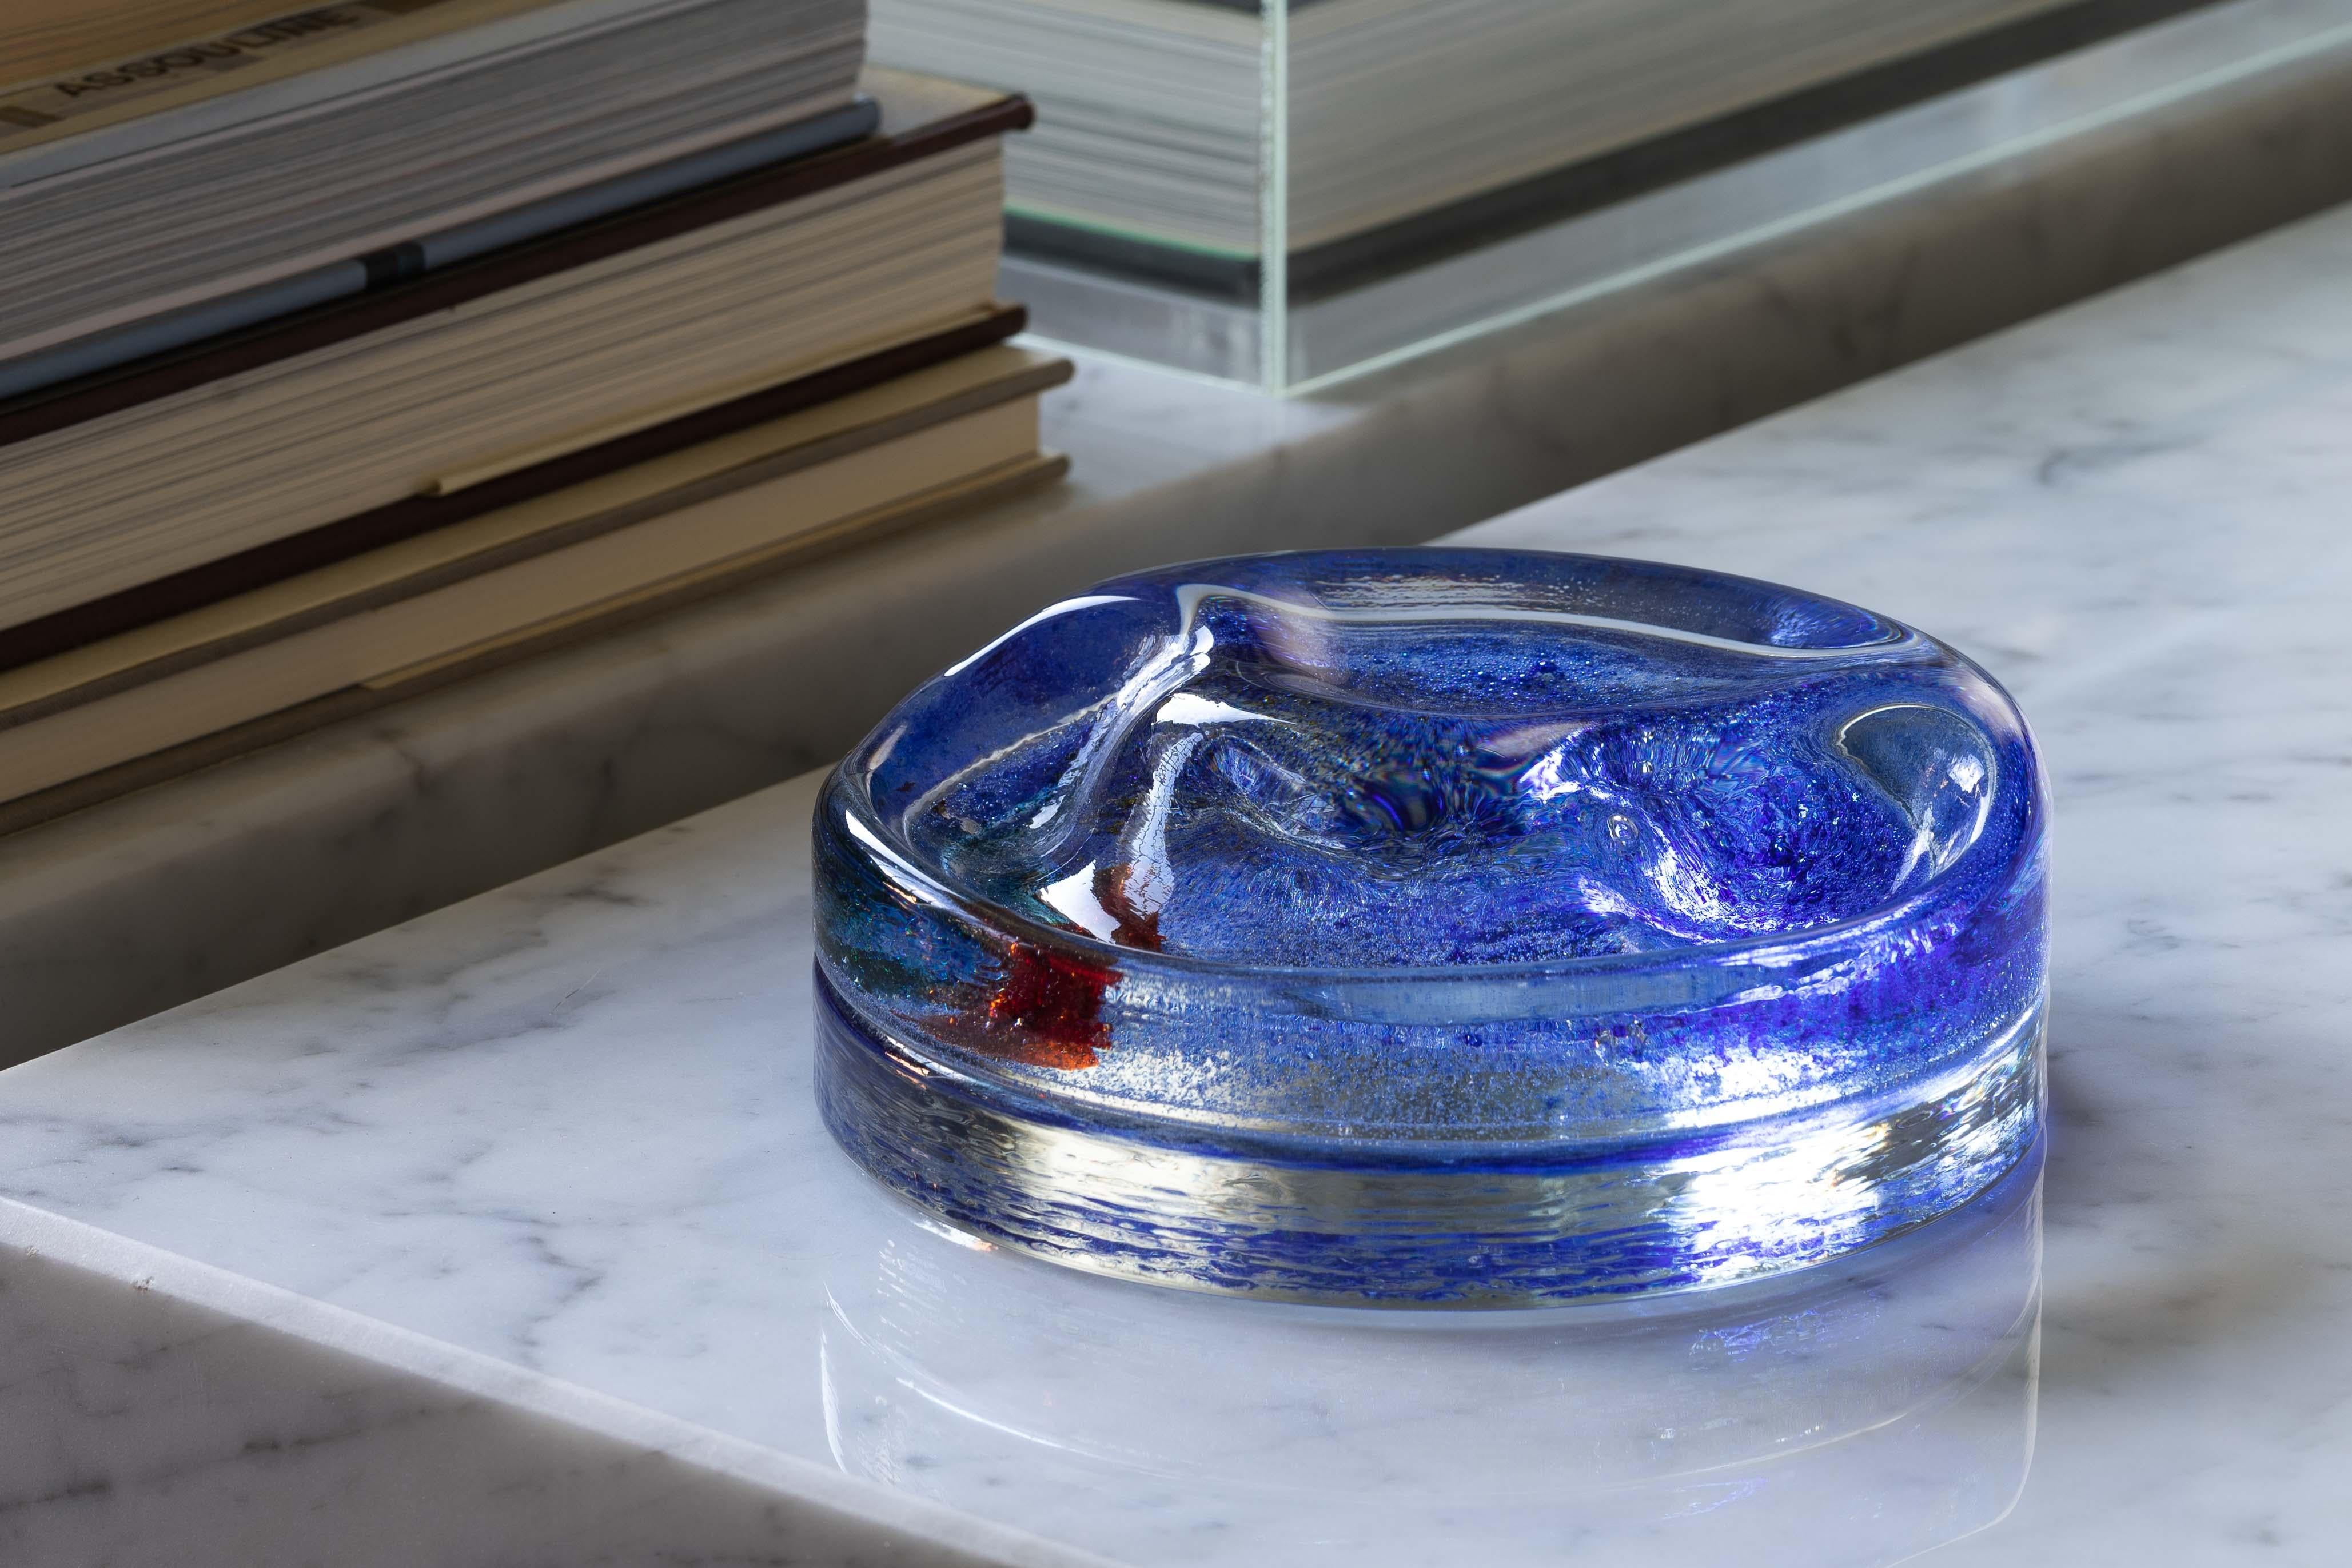 A two-piece cast and blown catchall by Alfredo Barbini for Barbini Murano from the early 1970s. The circular vide-poche has a lower clear textured base, and smooth organic formed upper with a half moon recess. Between the two pieces polychrome oxide